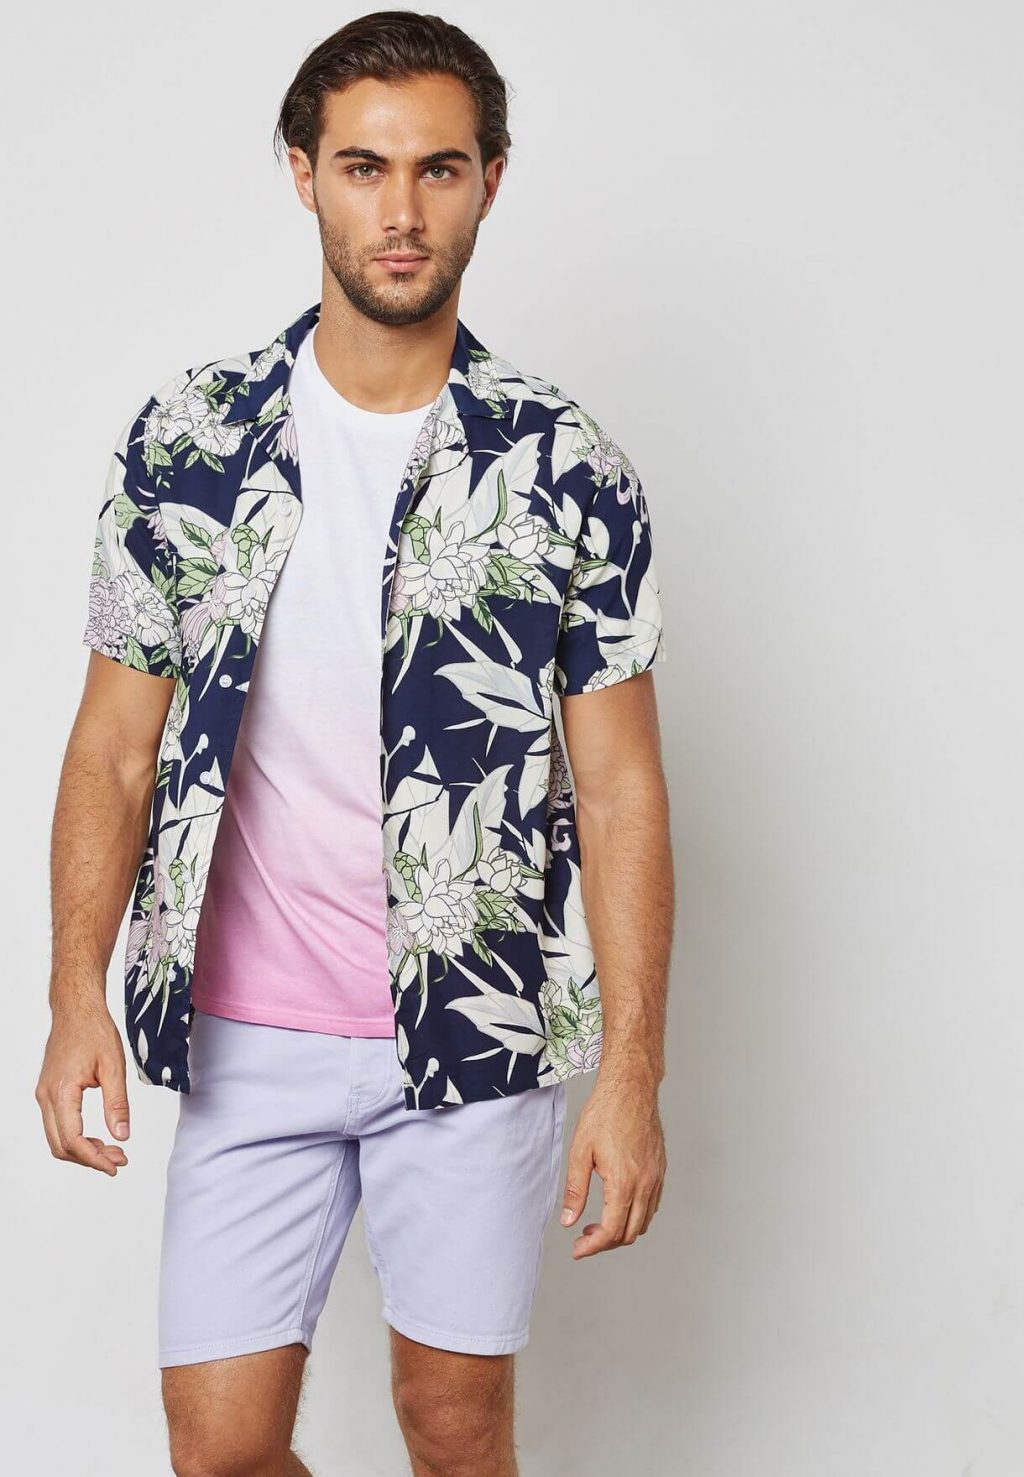 How to Style Floral Shirt? - Men's Styling Guide | Fashionterest